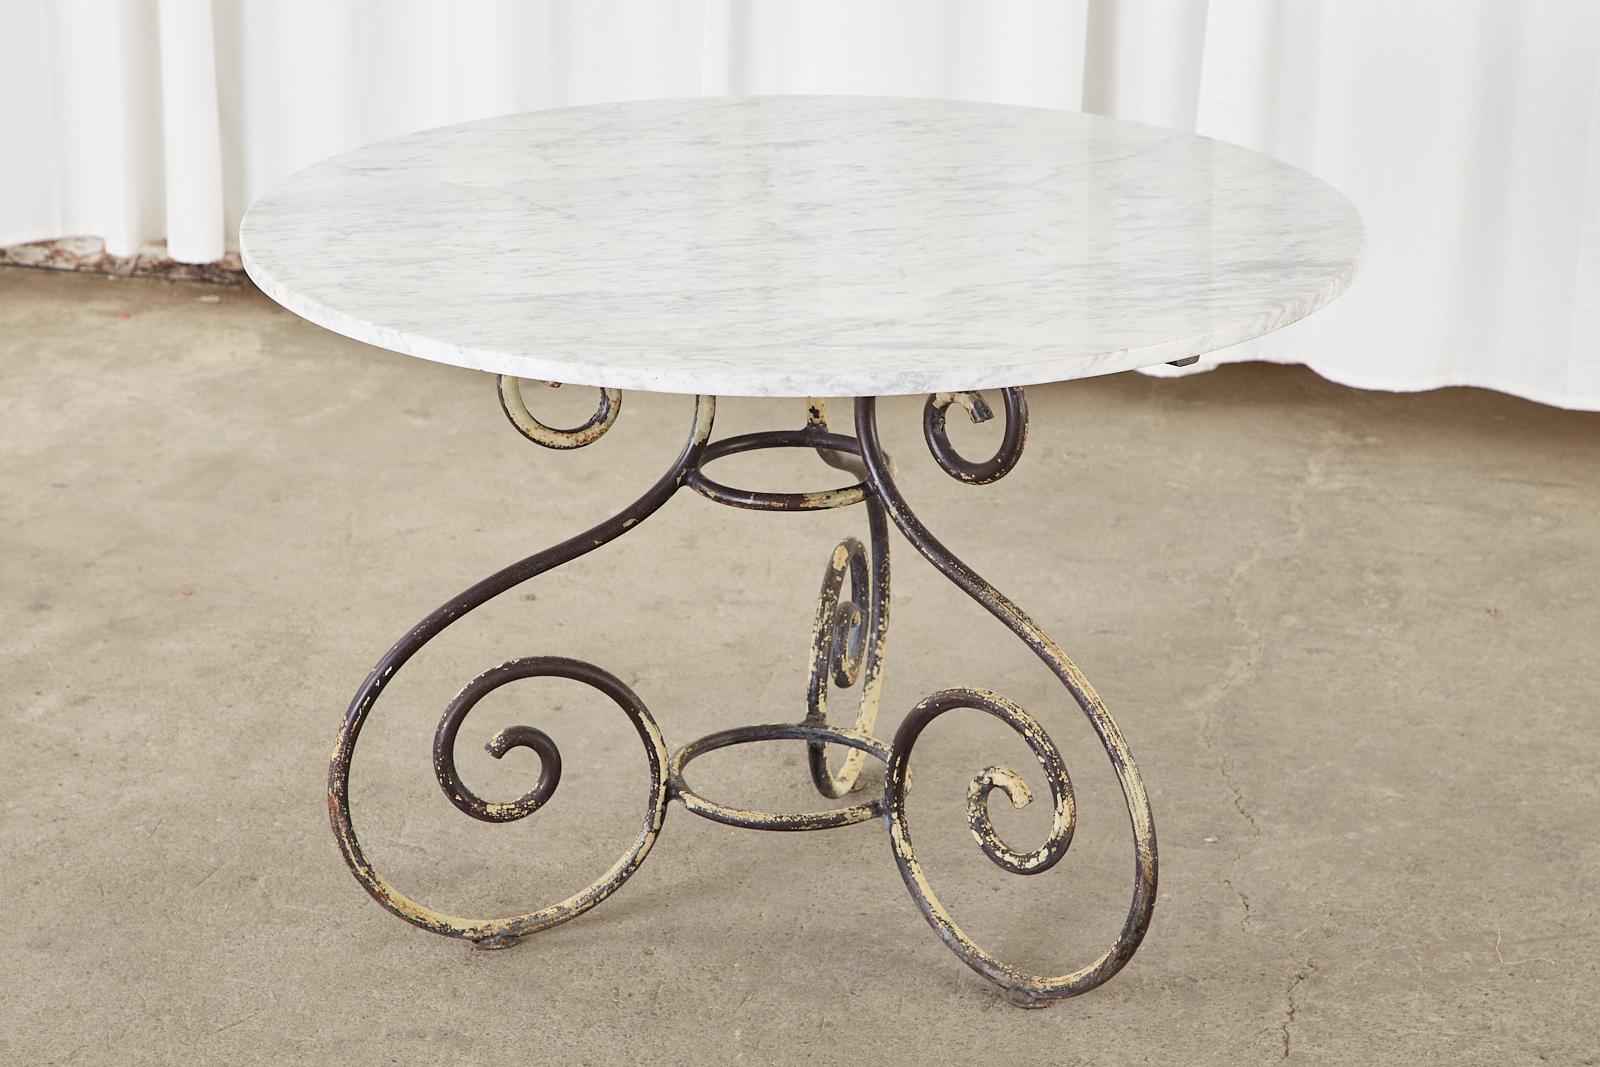 Hand-Crafted French Art Nouveau Carrrara Marble Iron Garden Dining Table For Sale